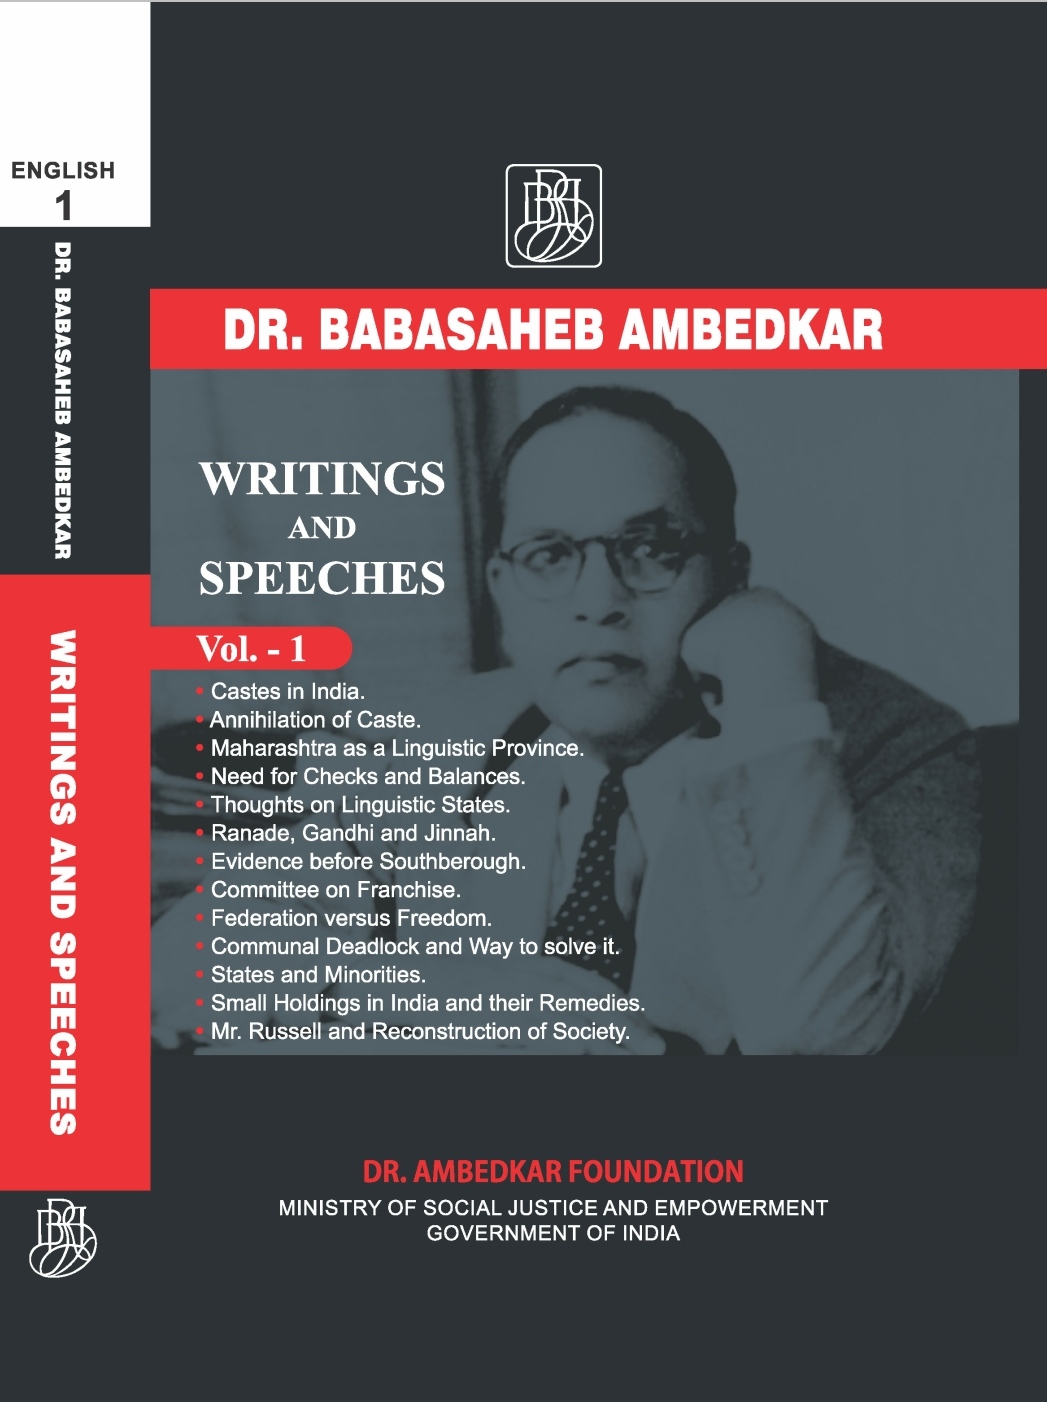 dr. babasaheb ambedkar writings and speeches vol. 3